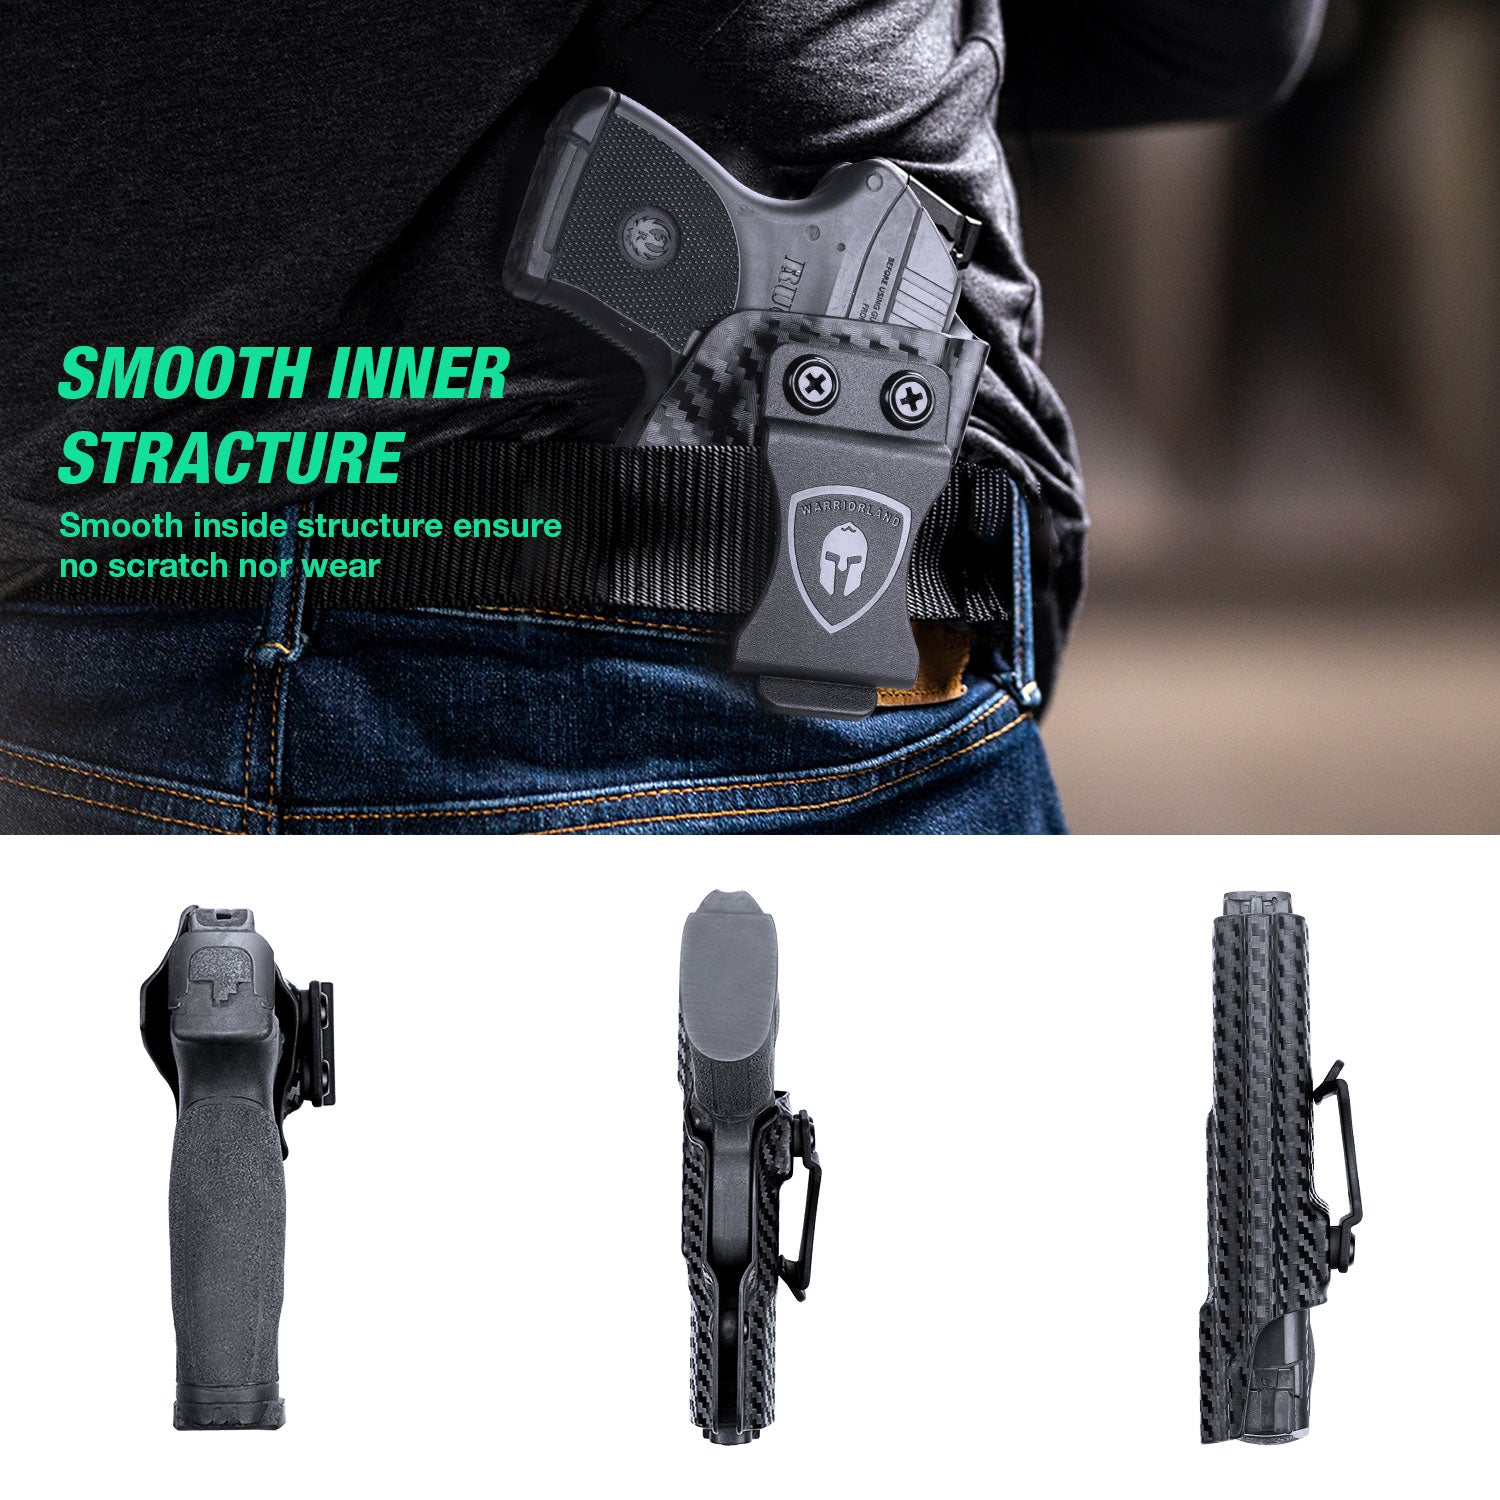 Carbon Fiber Kydex Smith and Wesson M&P / M&P M2.0 / 9/.40 / Compact/Full Size  IWB Holster Concealed Carry | WARRIORLAND